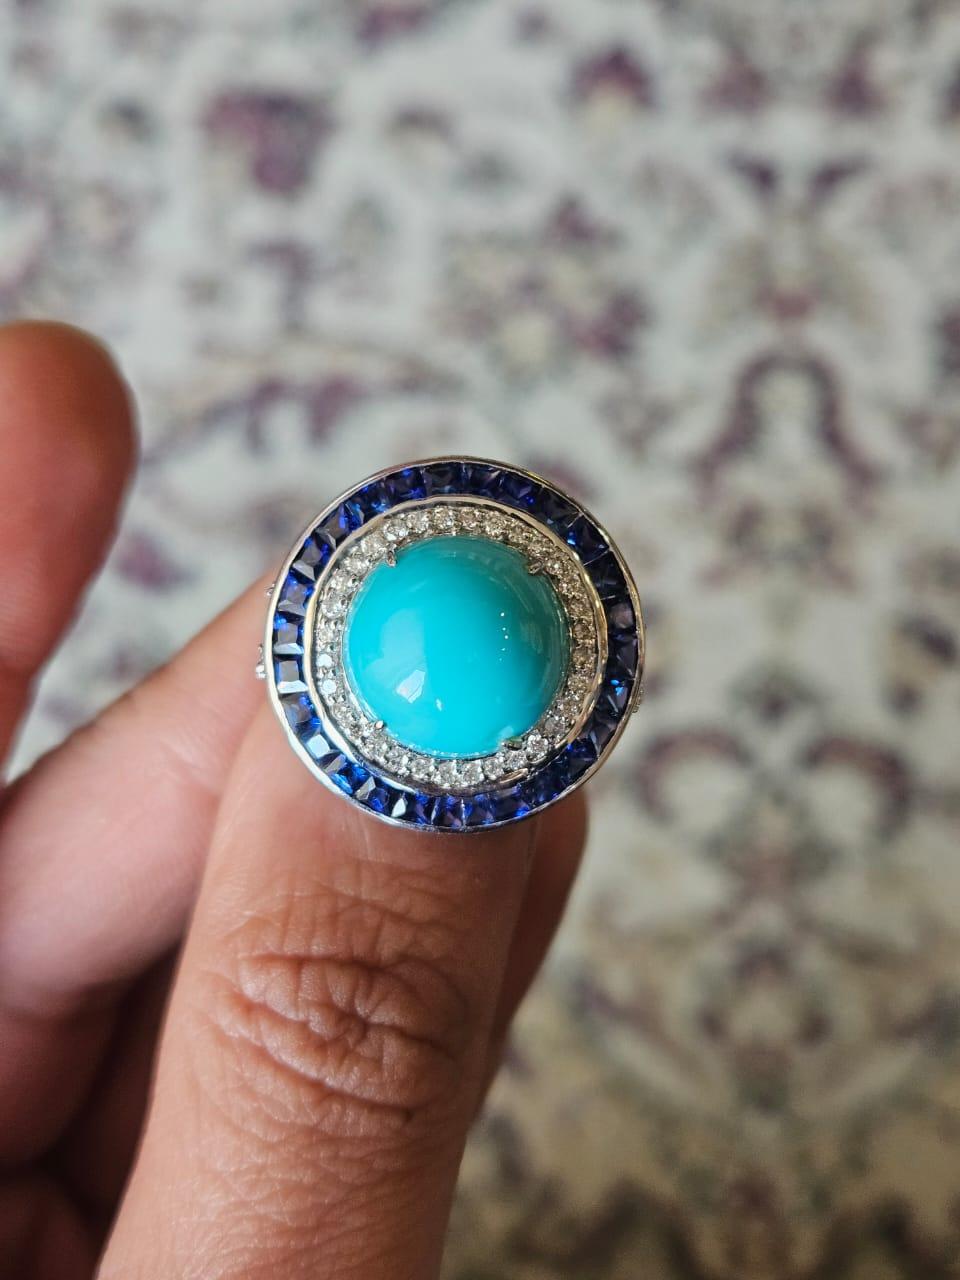 A very beautiful and unique, Turquoise & Blue Sapphire Cocktail Ring set in 18K White Gold & Diamonds. The weight of the Turquoise is 8.65 carats. The Blue Sapphires weight is 2.75 carats. The Blue Sapphires are of Ceylon (Sri Lanka) origin. The